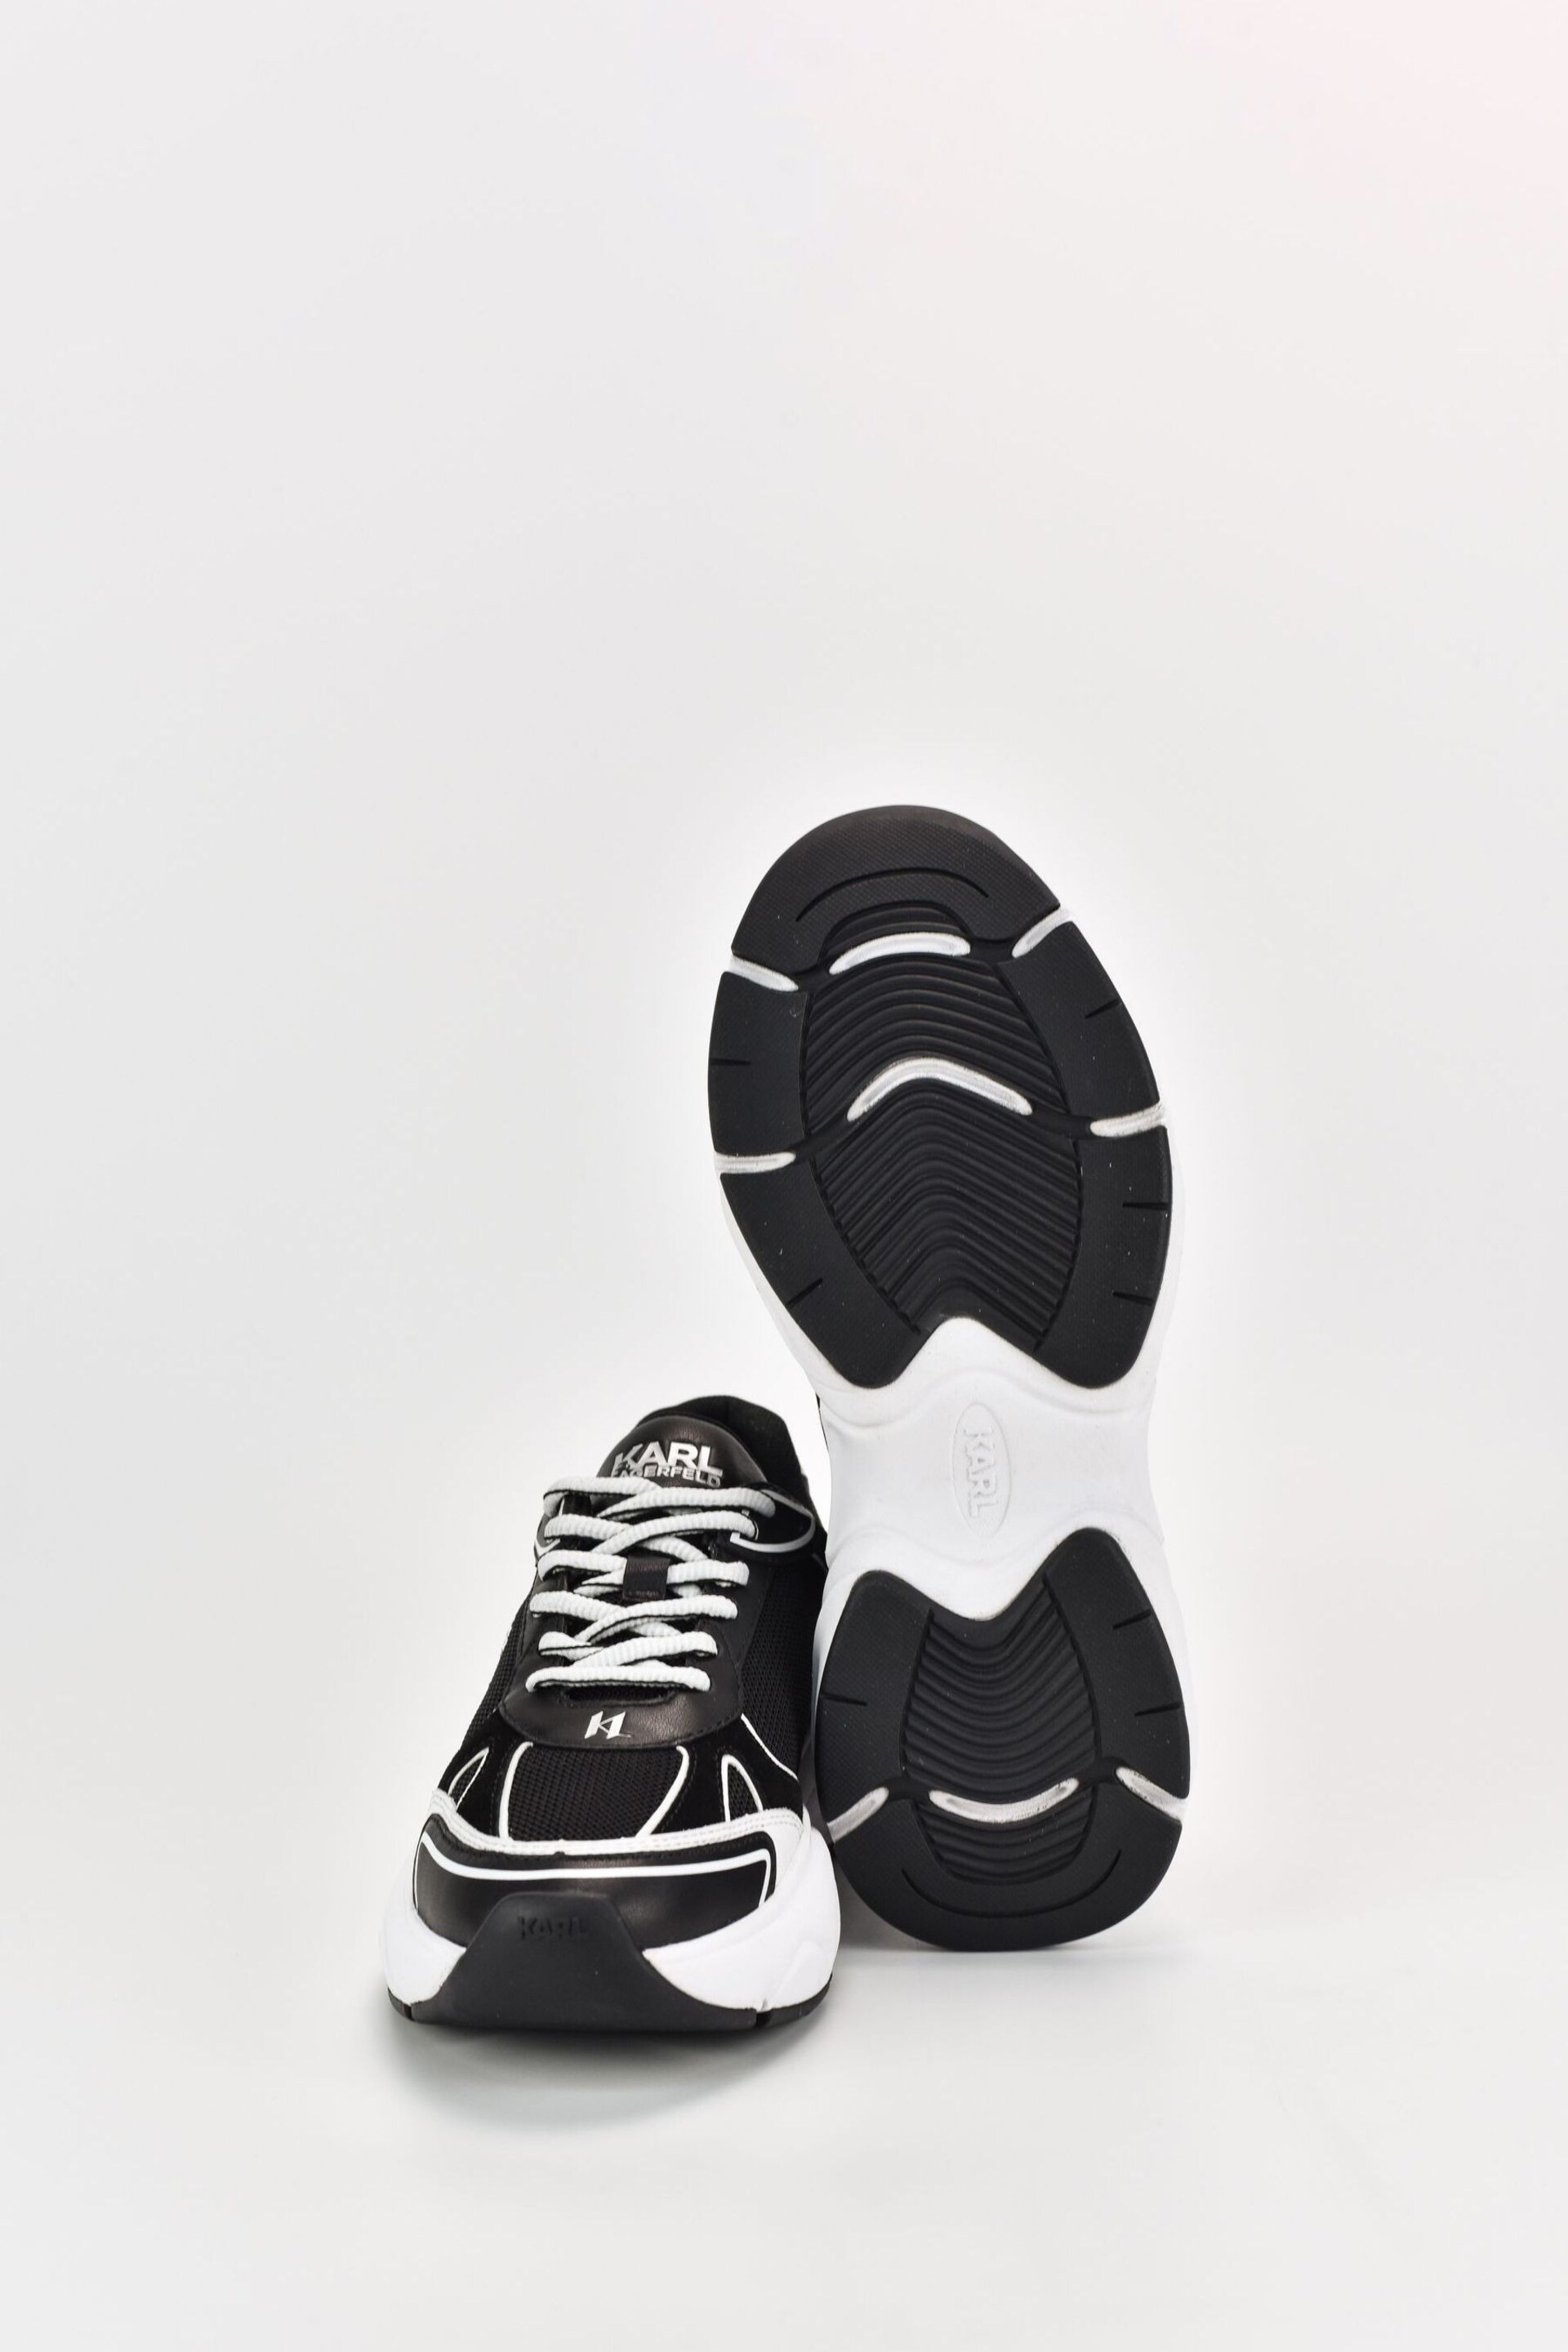 Karl Lagerfeld Komet Leather Mix Trainers - Image 5 of 5